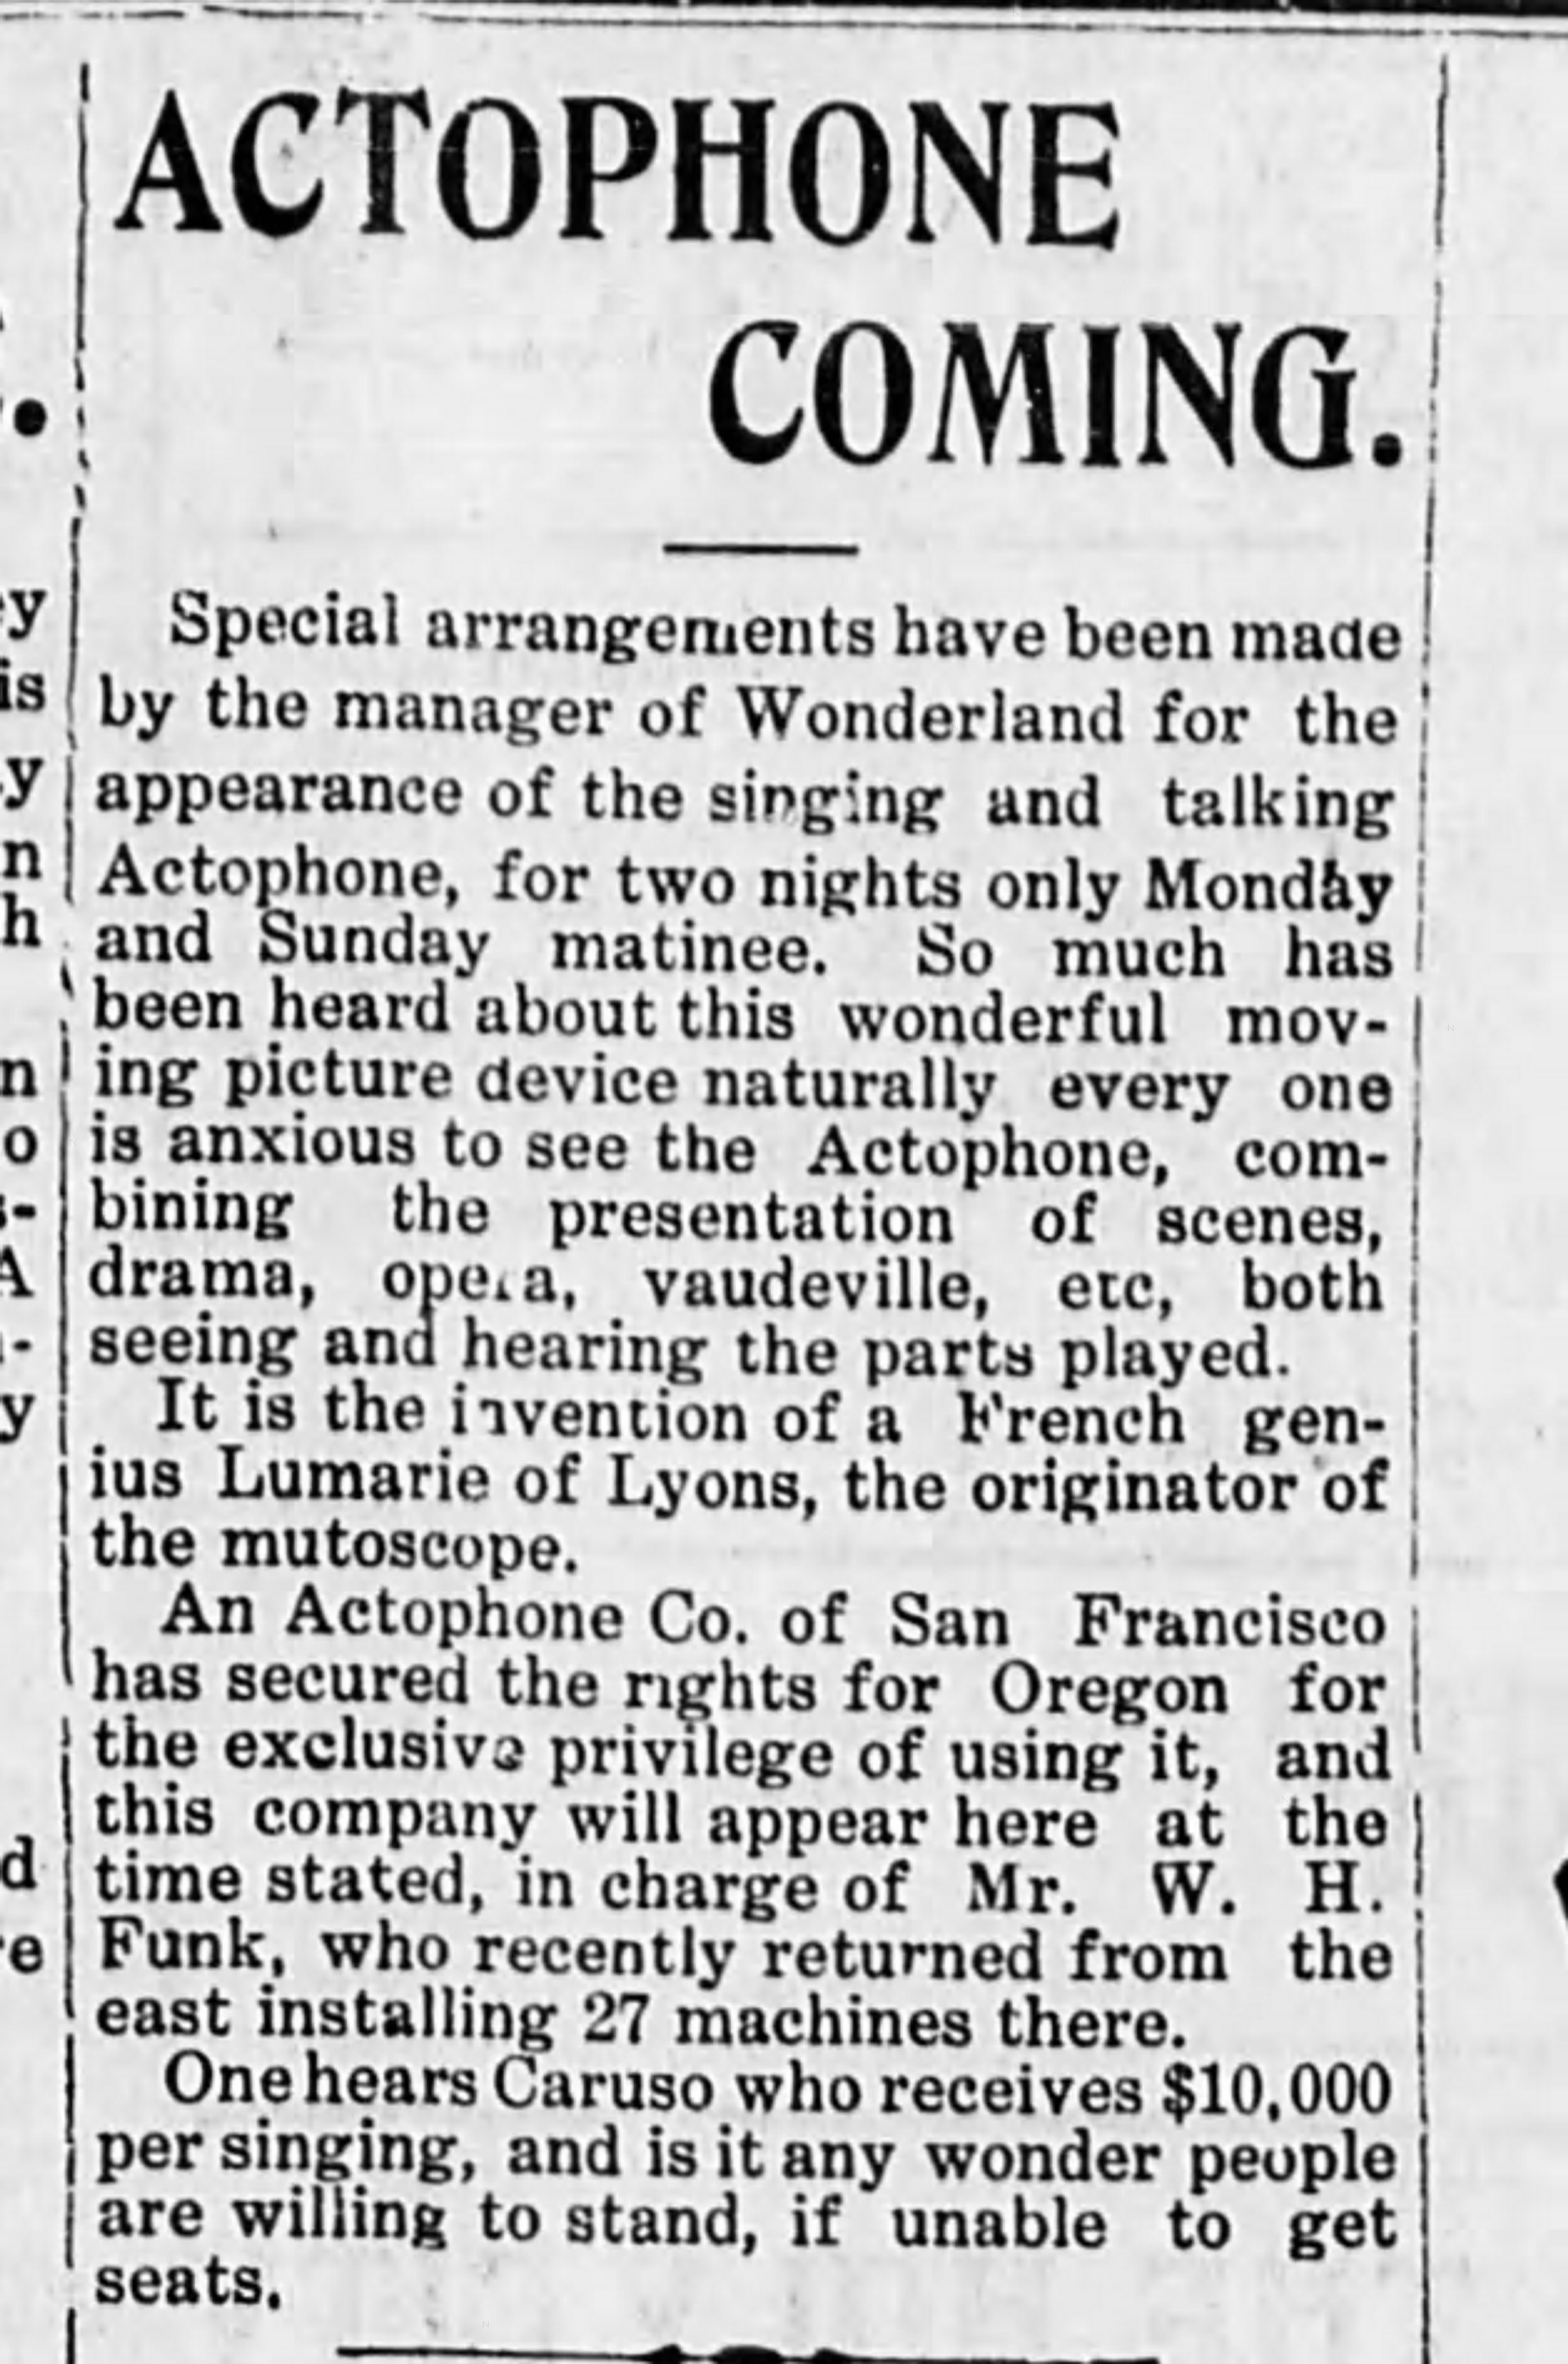 Actophone at the Wonderland theater, 1908